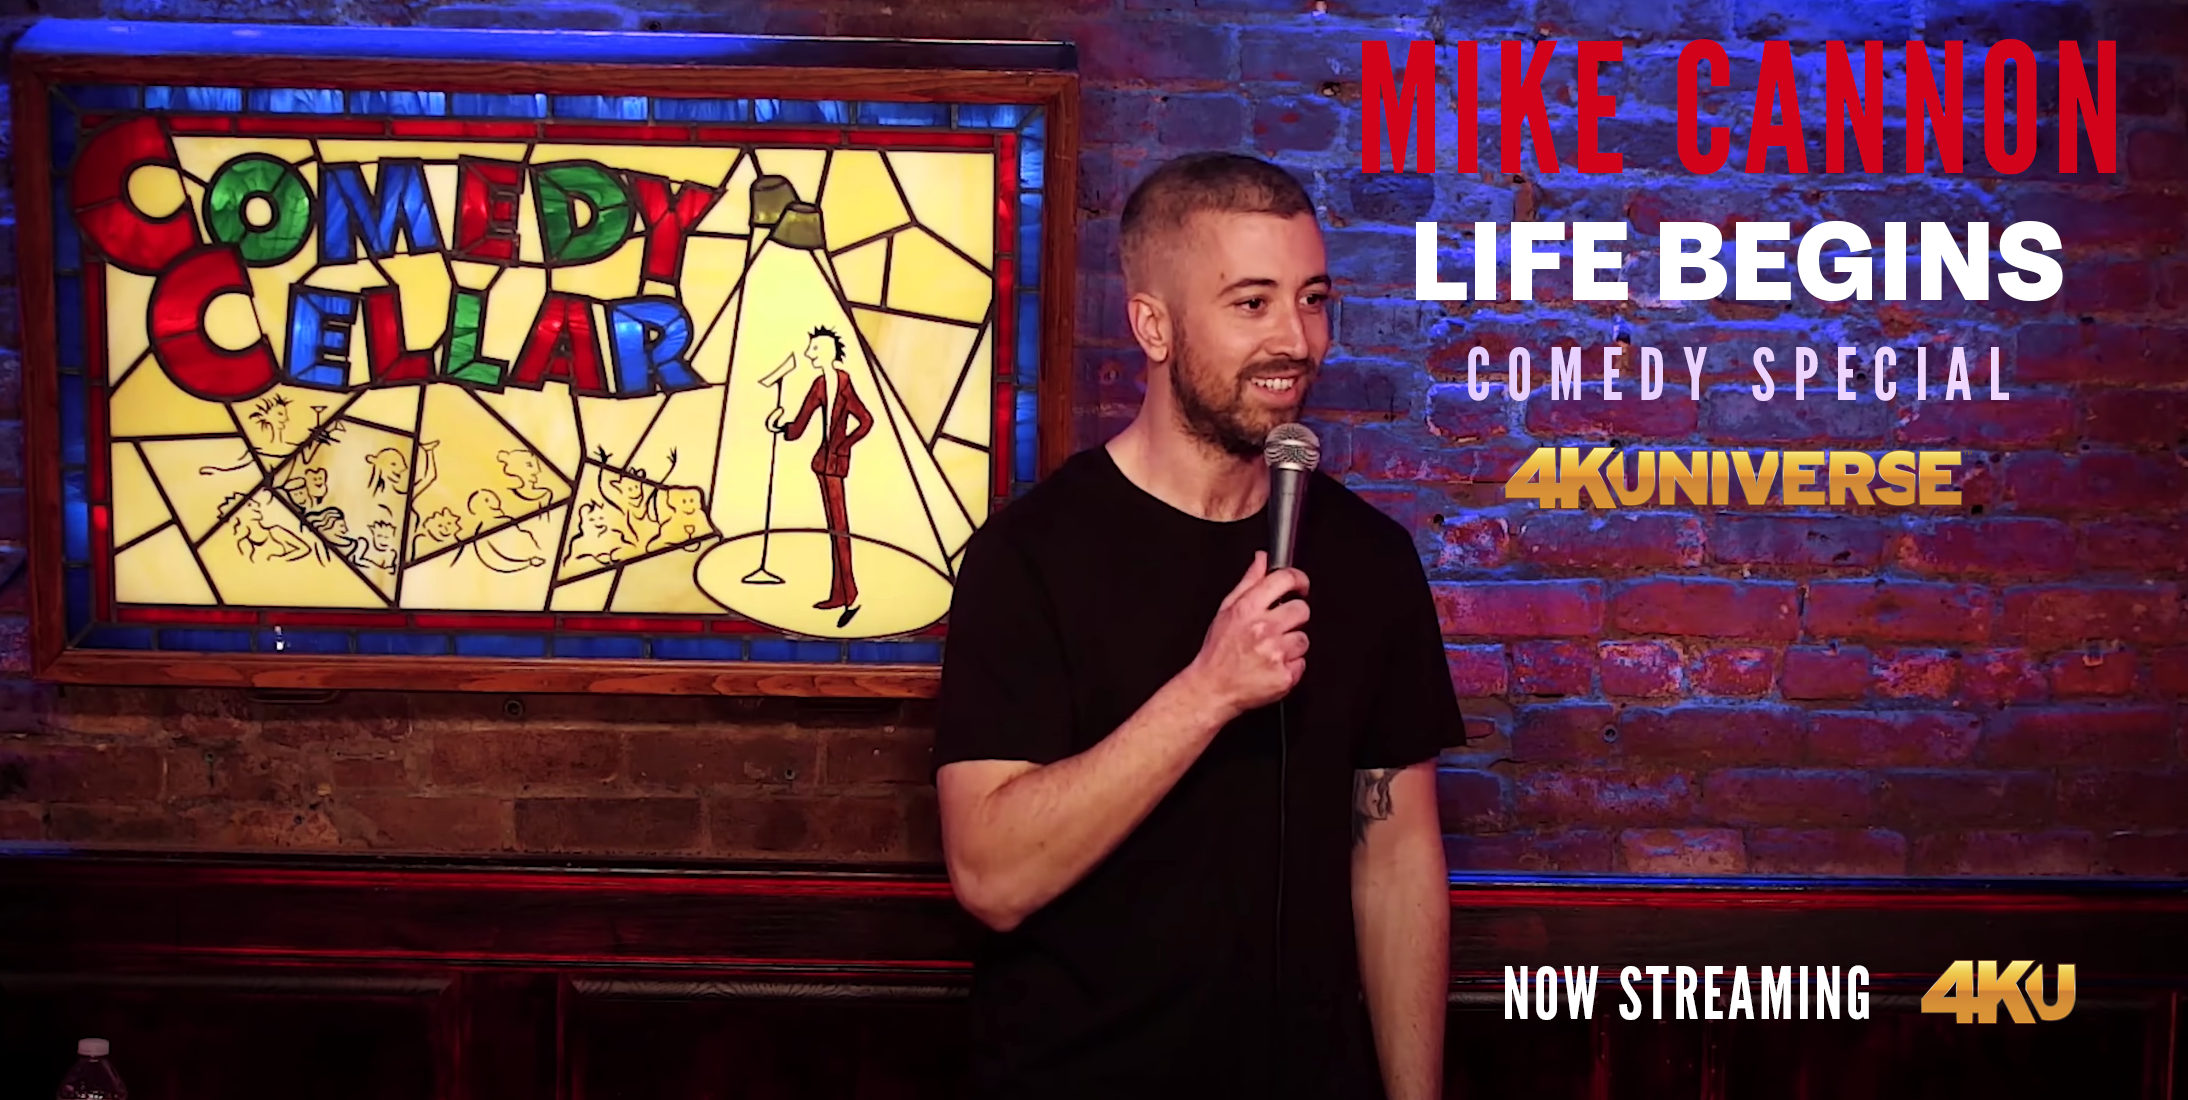 Mike Cannon: Life Begins Comedy Special